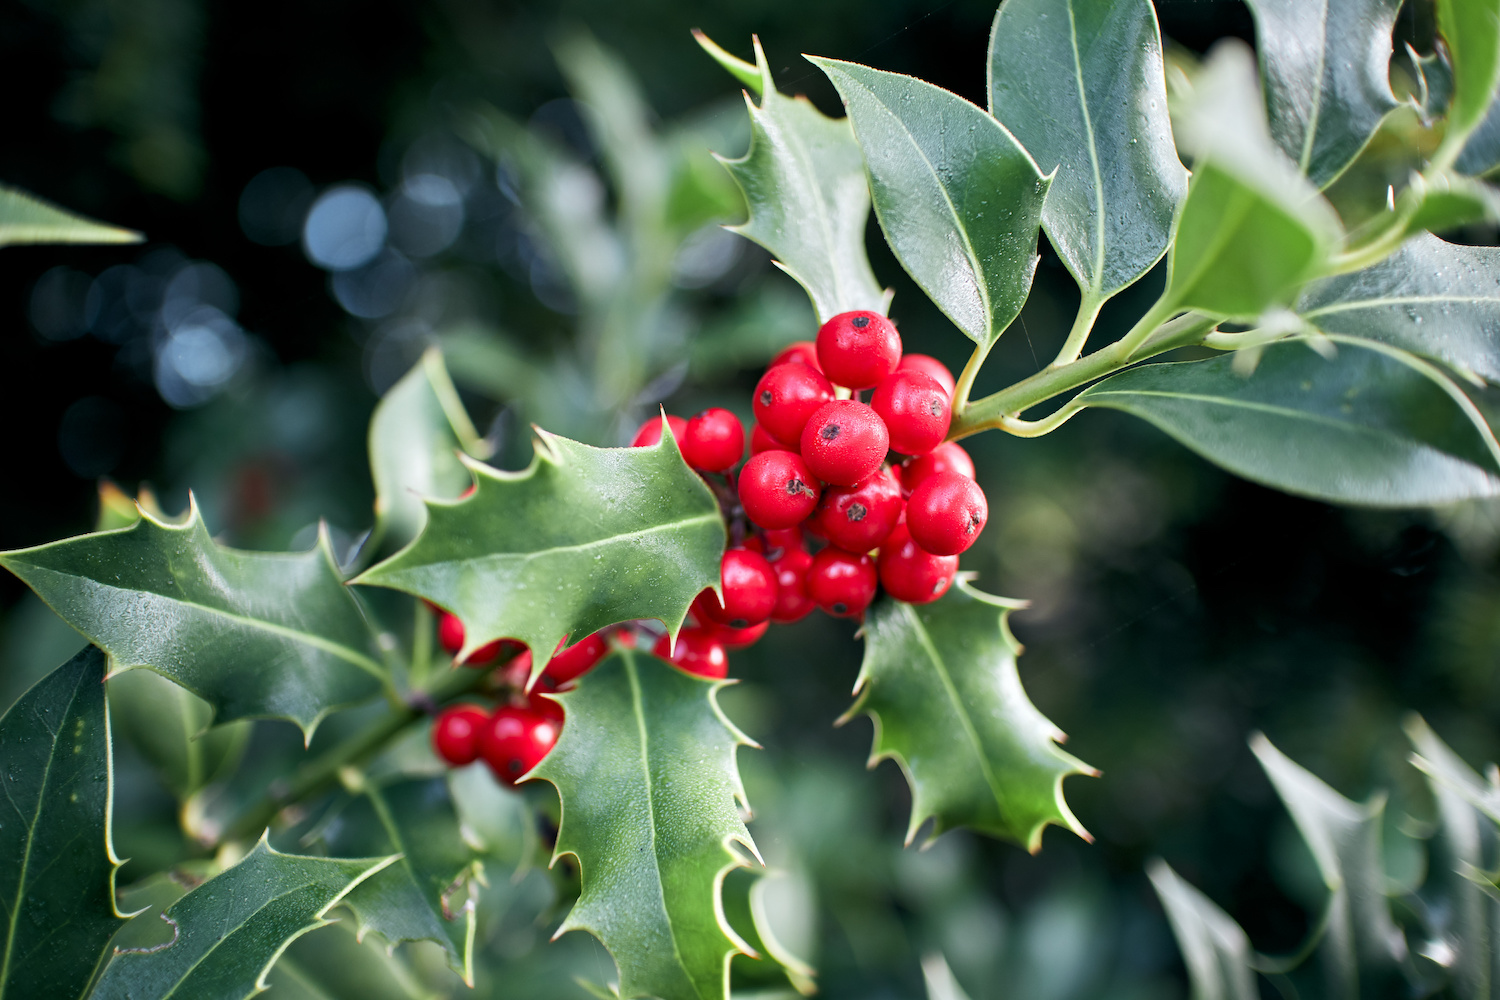 Green Holly Bush leaves with a cluster of vibrant red berries.